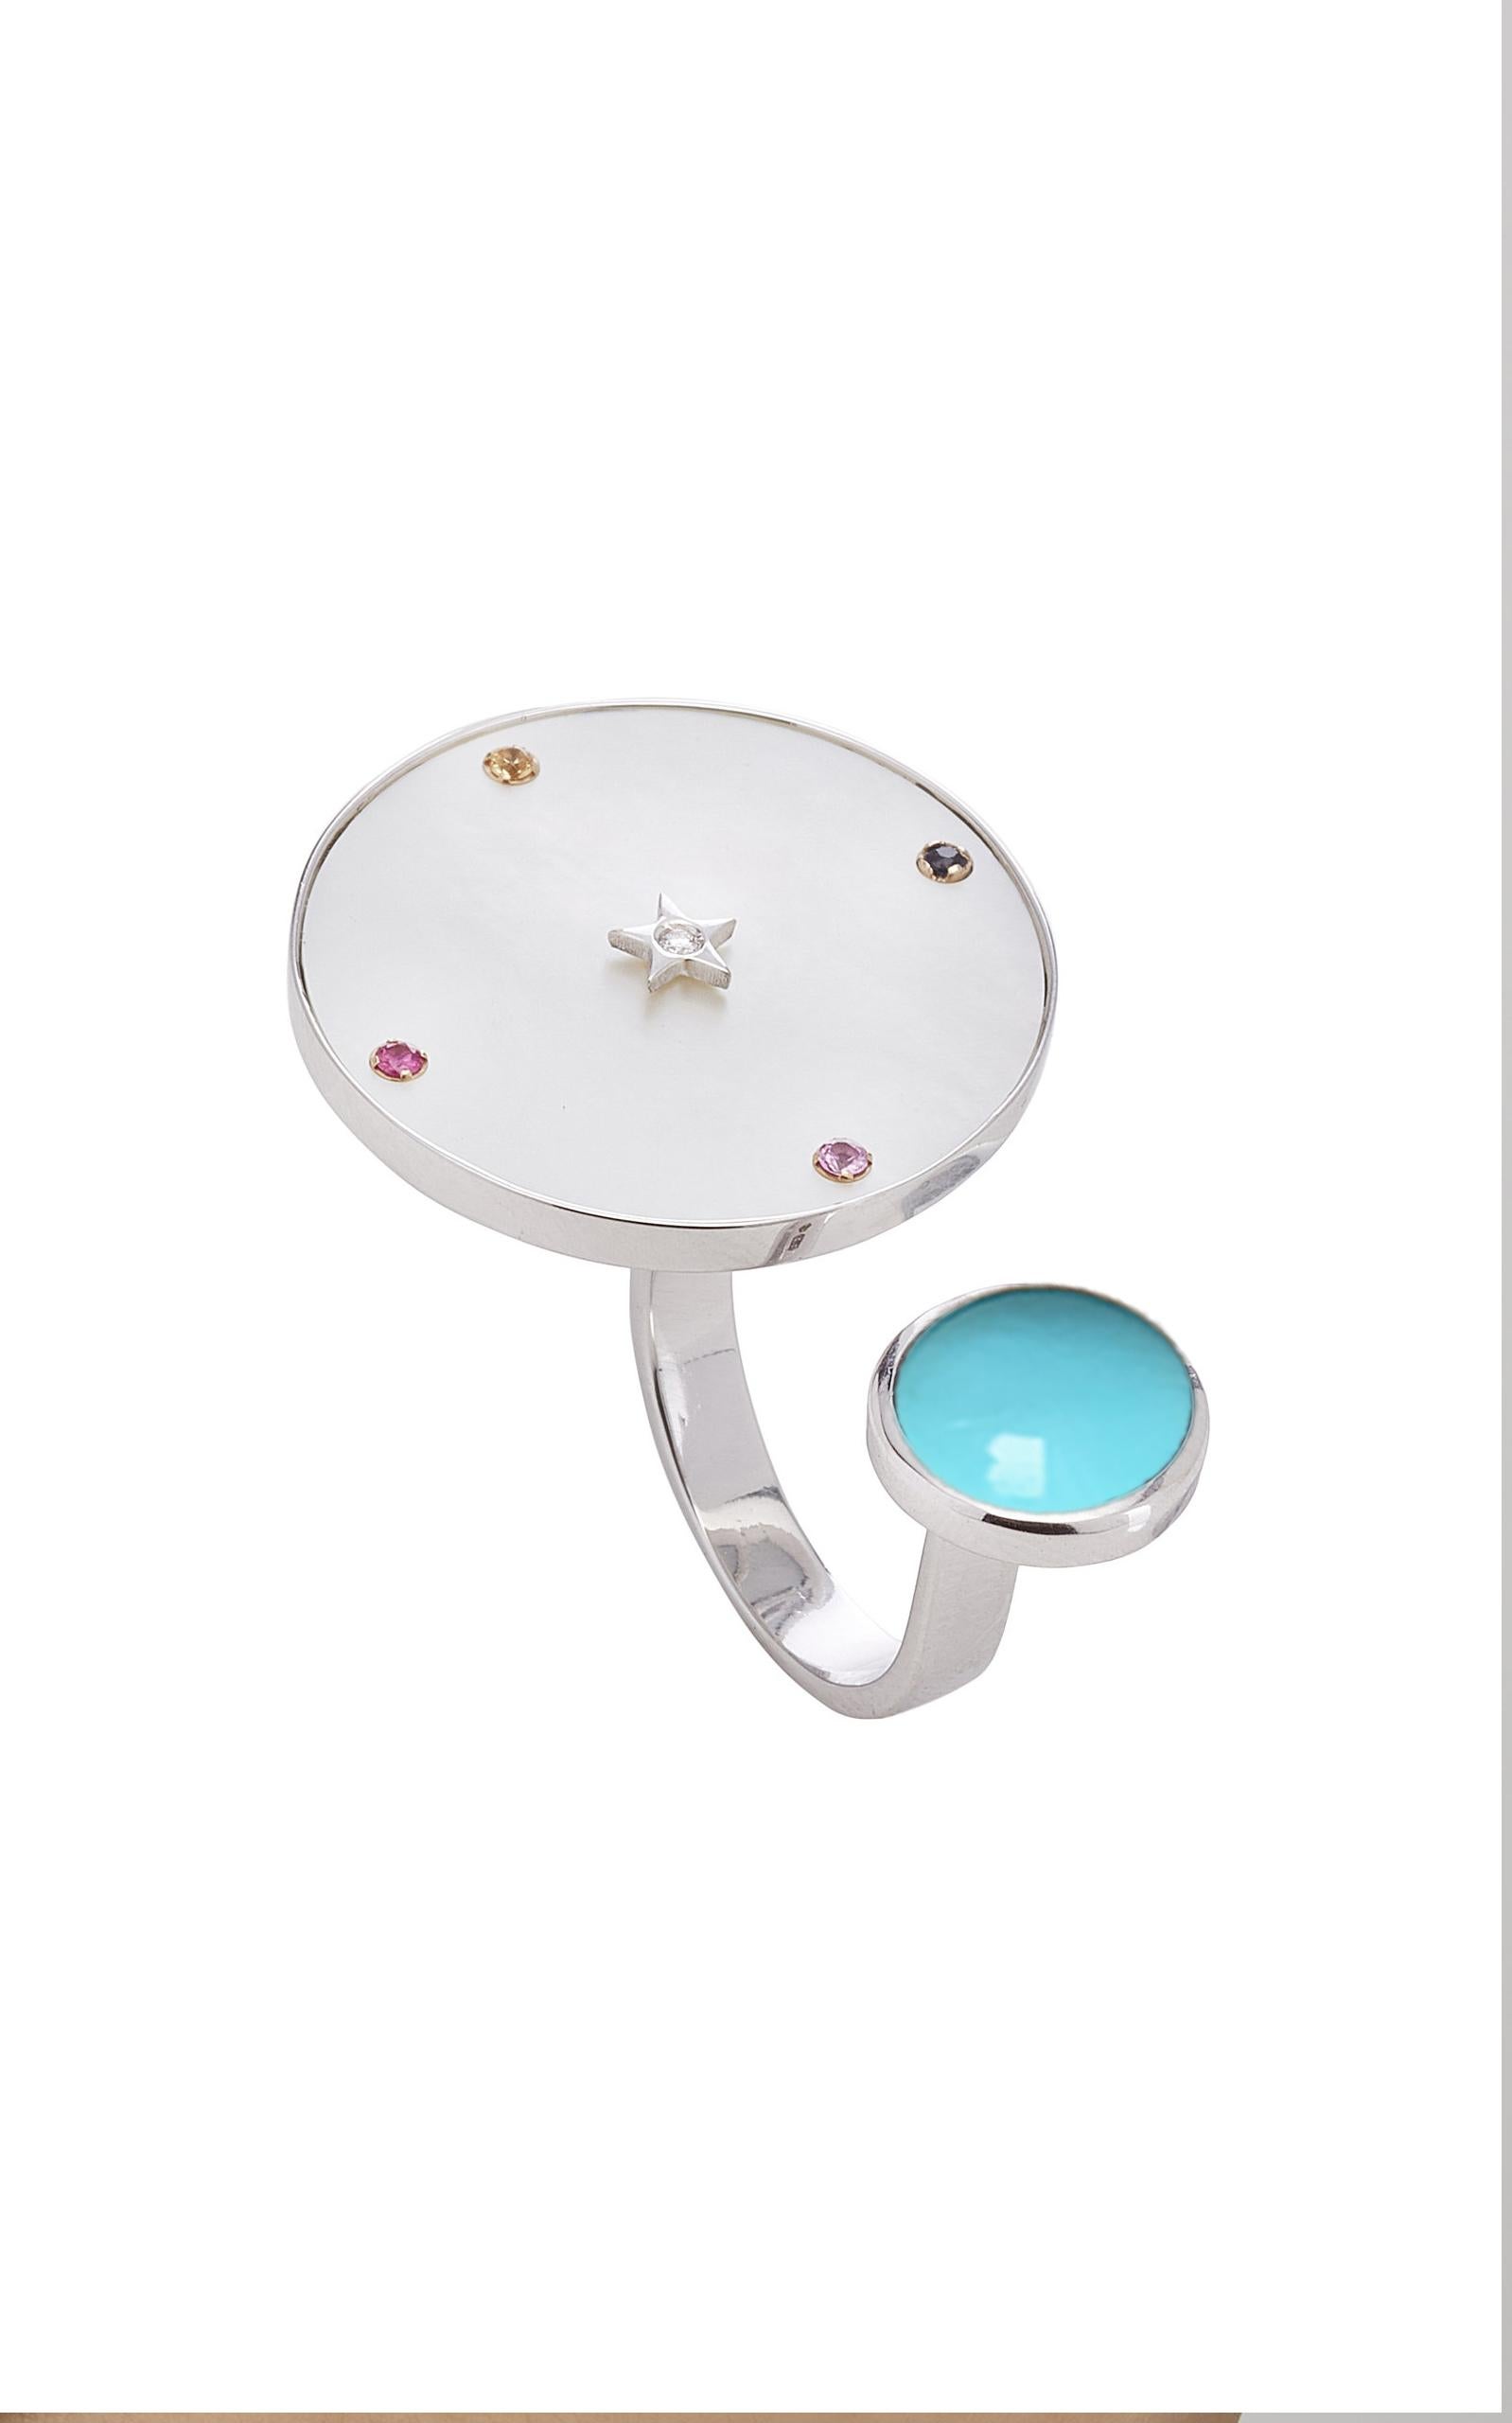 Ora Collection. Between Fingers Ring.
Inspired by the concept of time, Anna Maccieri Rossi's 'ORA Between Fingers Ring' features a natural turquoise cabochon and a mother of pearl dial where the hours of the day are marked by multicolored sapphires